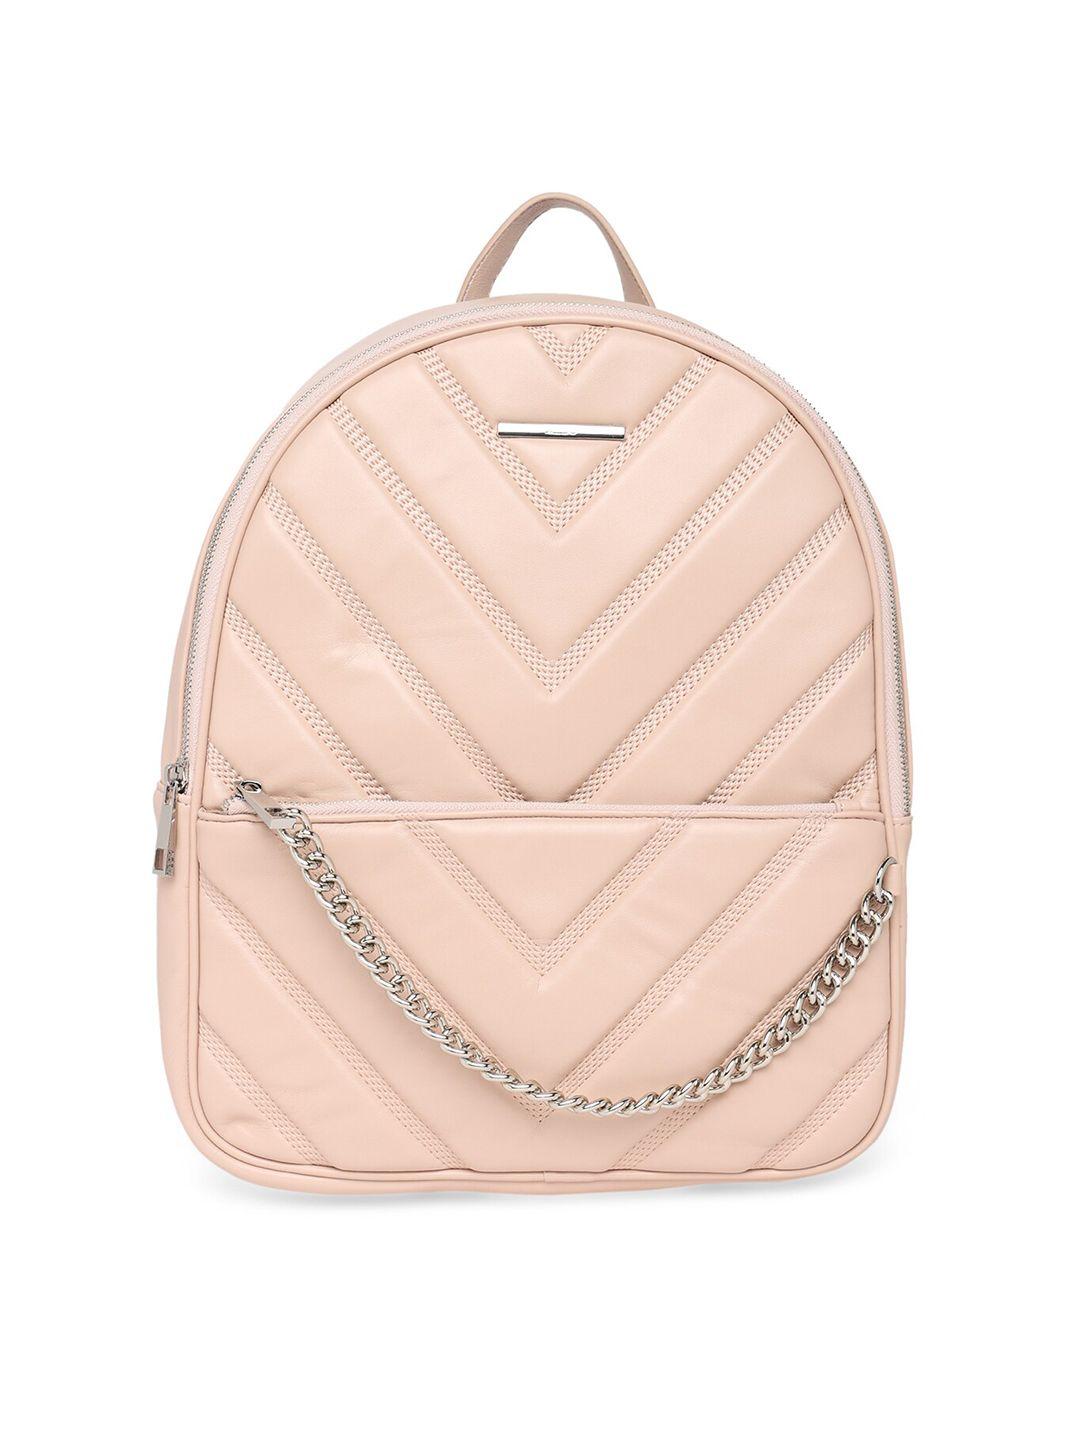 aldo-textured-medium-backpack-with-quilted